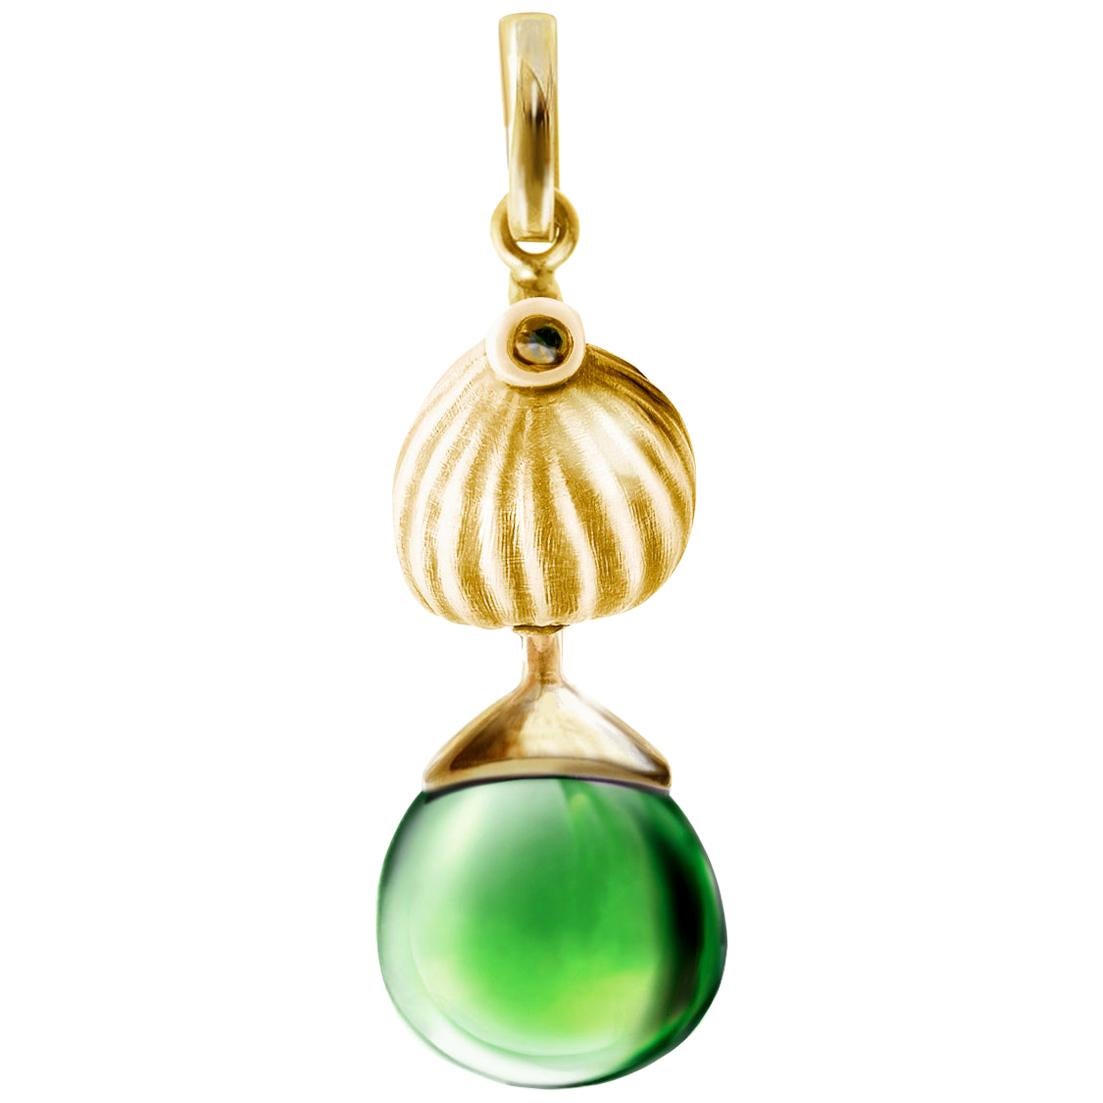 Yellow Gold Drop Pendant Necklace with Green Quartz by the Artist